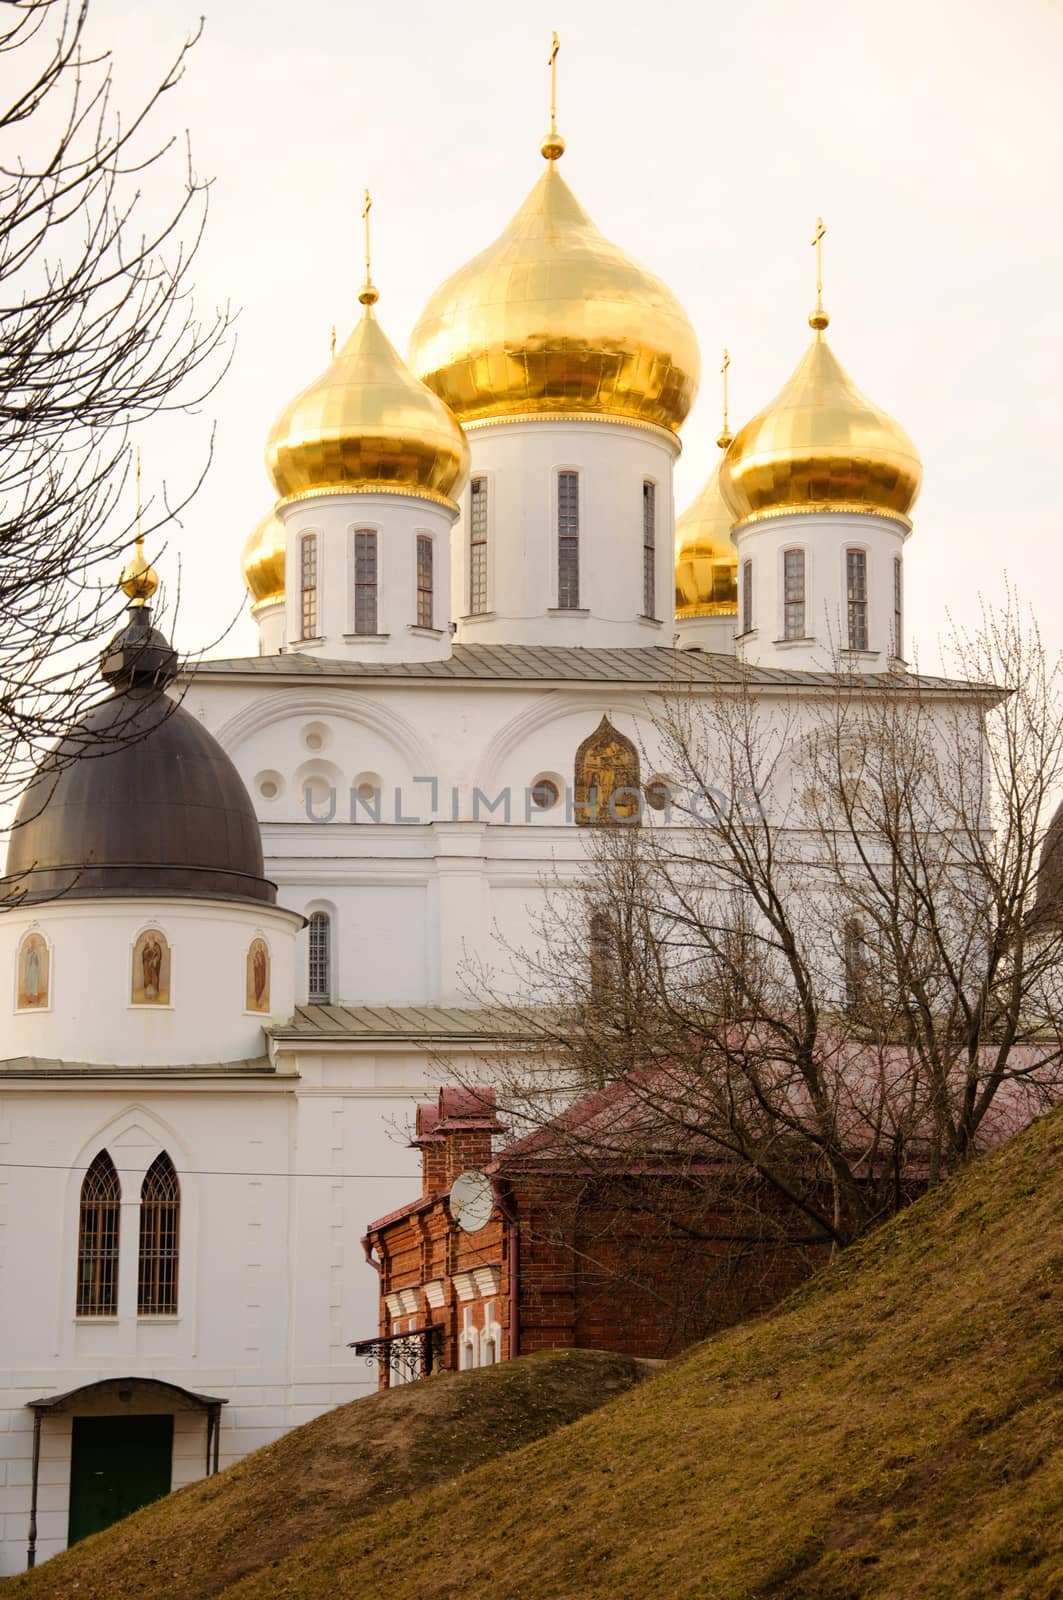 Uspensky orthodox Cathedral sobor with golden domes, Dmitrov, Moscow re by Eagle2308